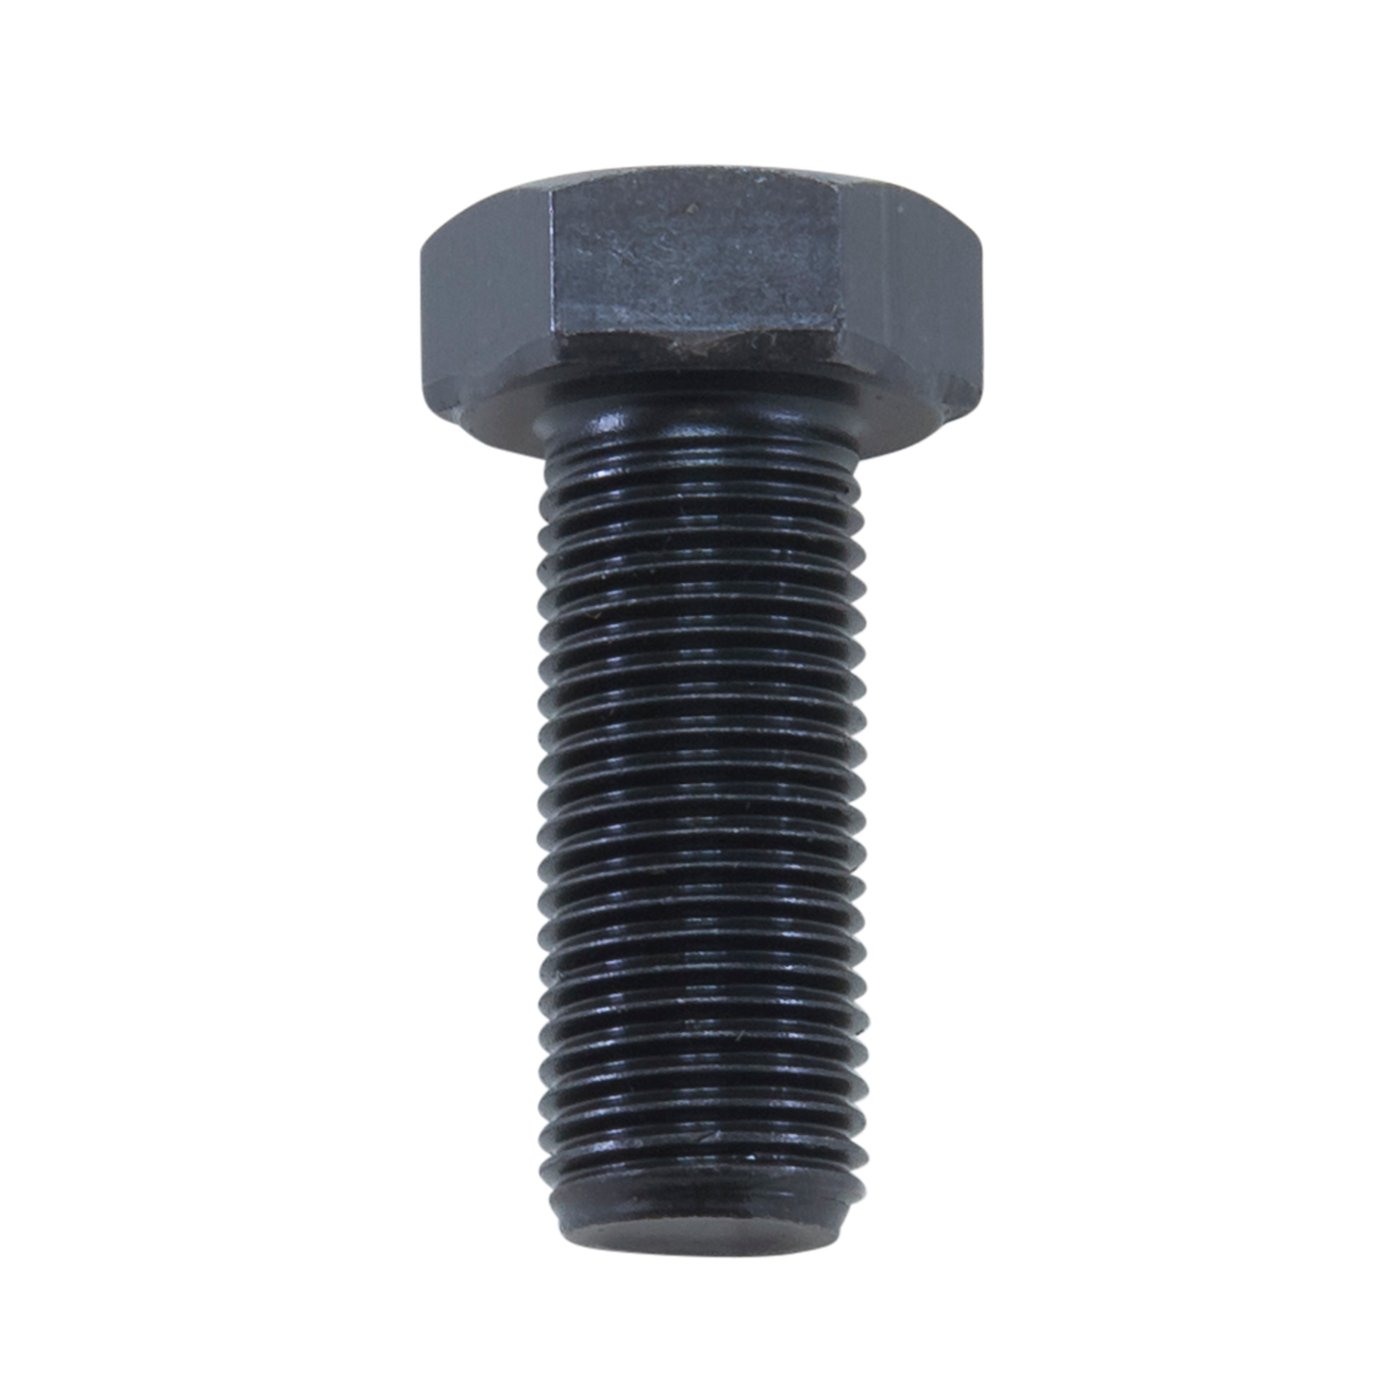 Ring Gear Bolt For Ford 10.25 in. & 10.5 in.